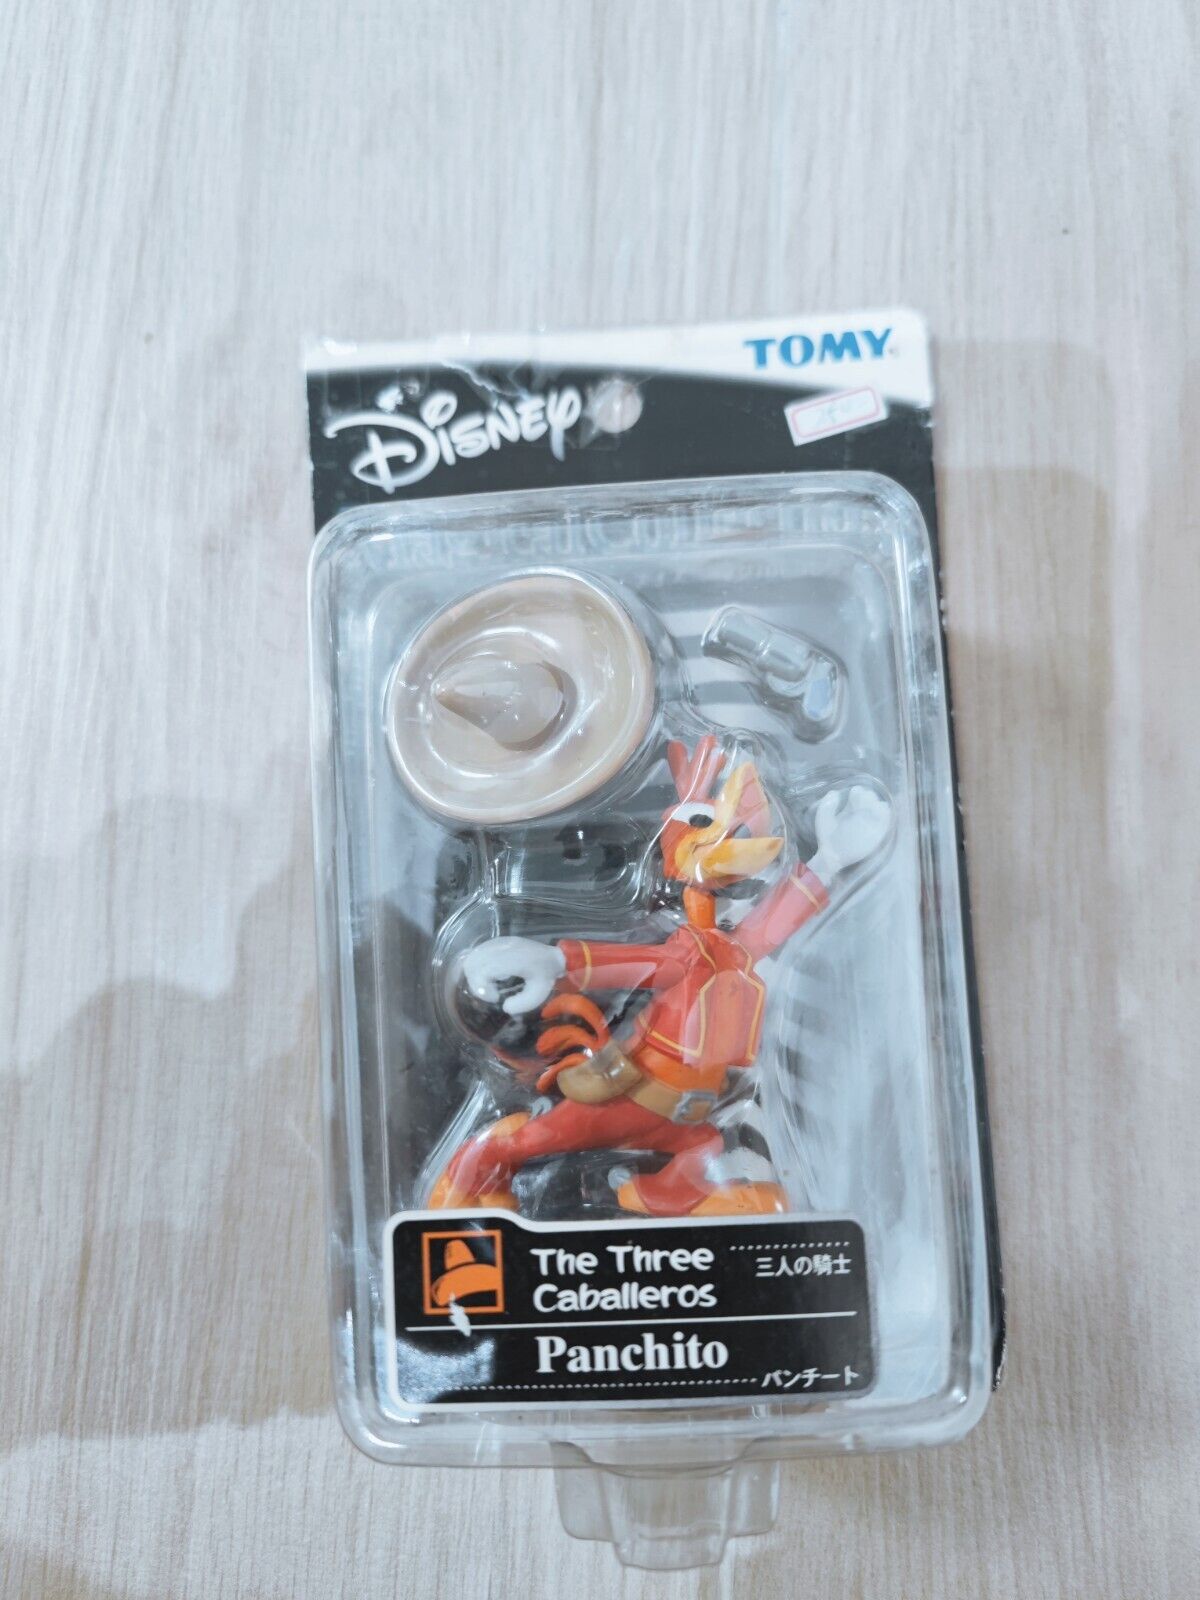 tomy disney magical collection 066 panchito The Three Caballeros